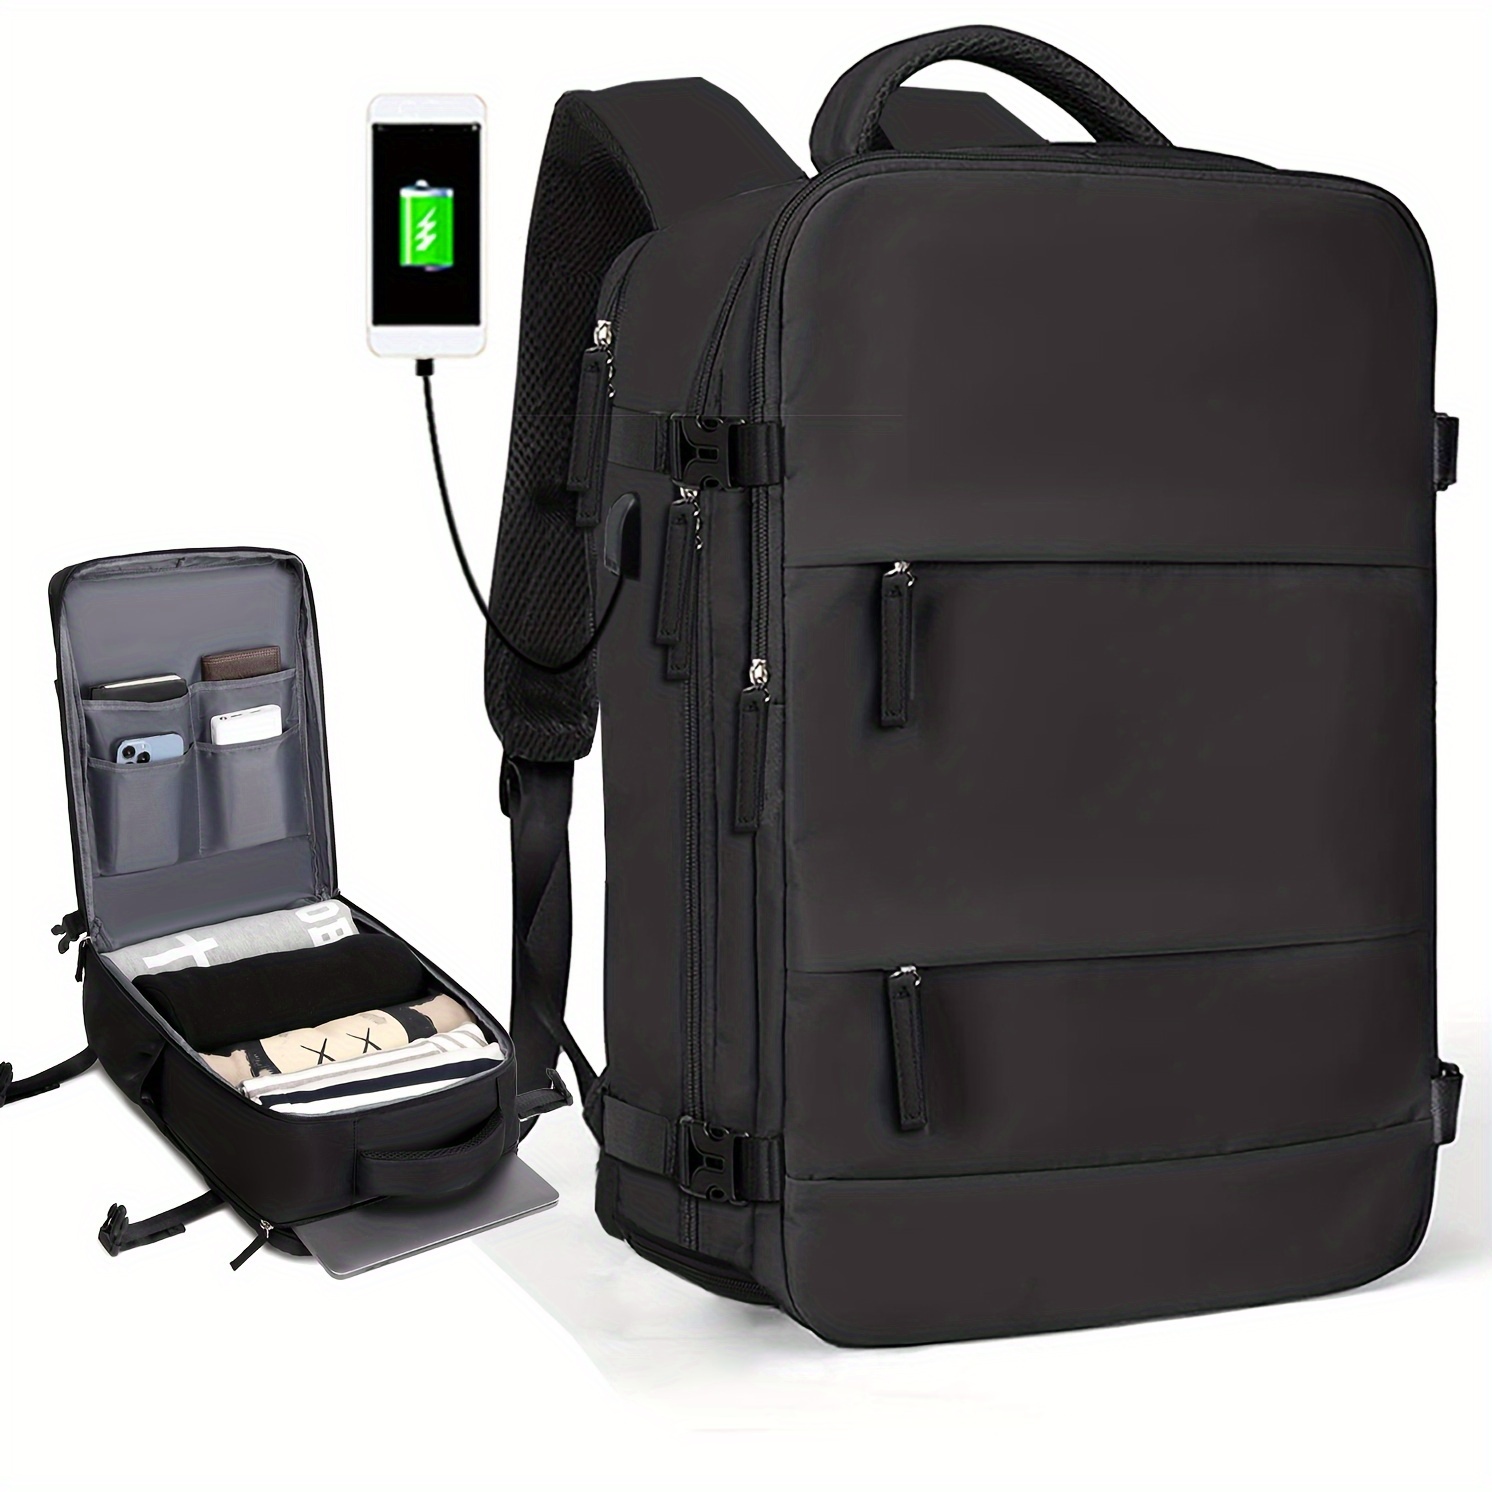 

Travel Laptop Backpack For Men And Women, Suitable For Travel Business Trips, School Bags, Valentines Gifts